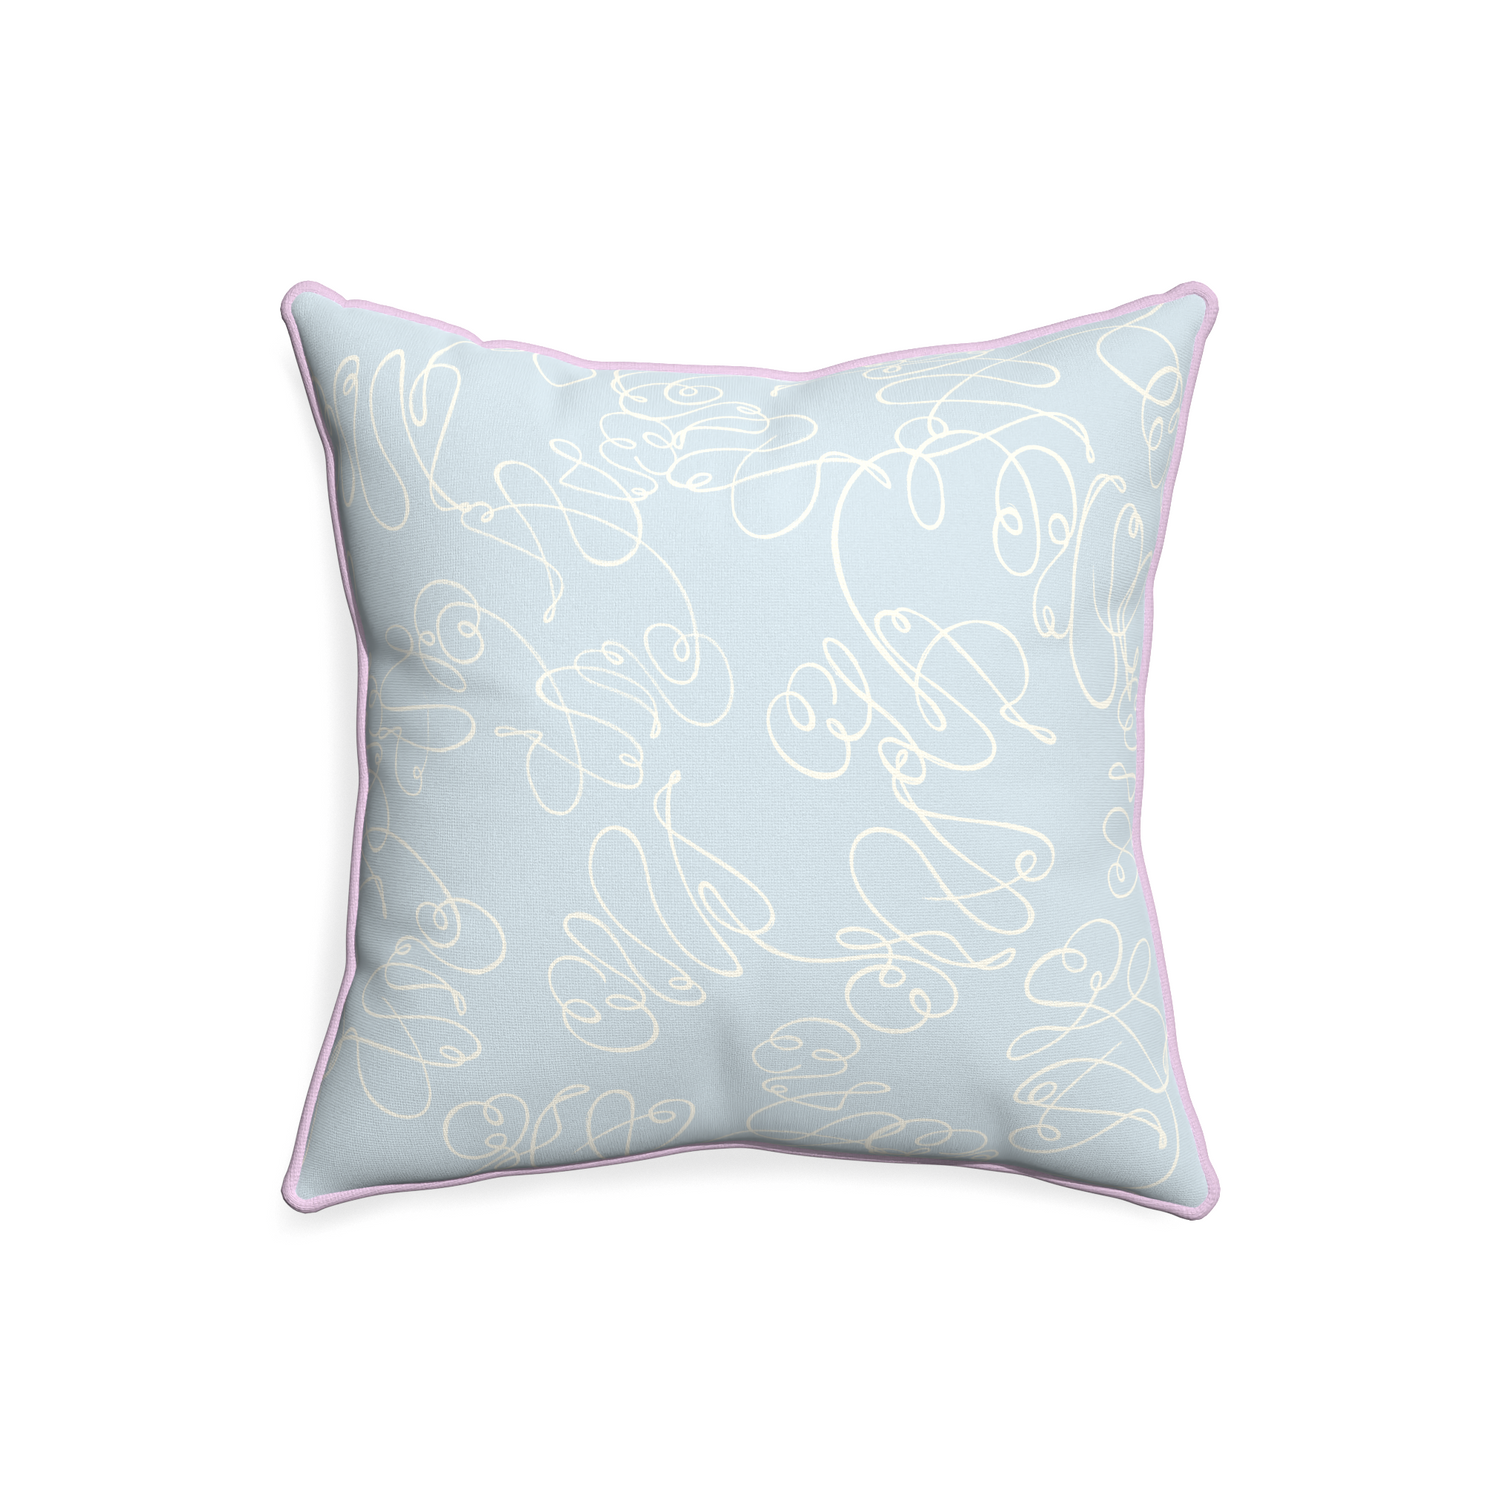 20-square mirabella custom powder blue abstractpillow with l piping on white background